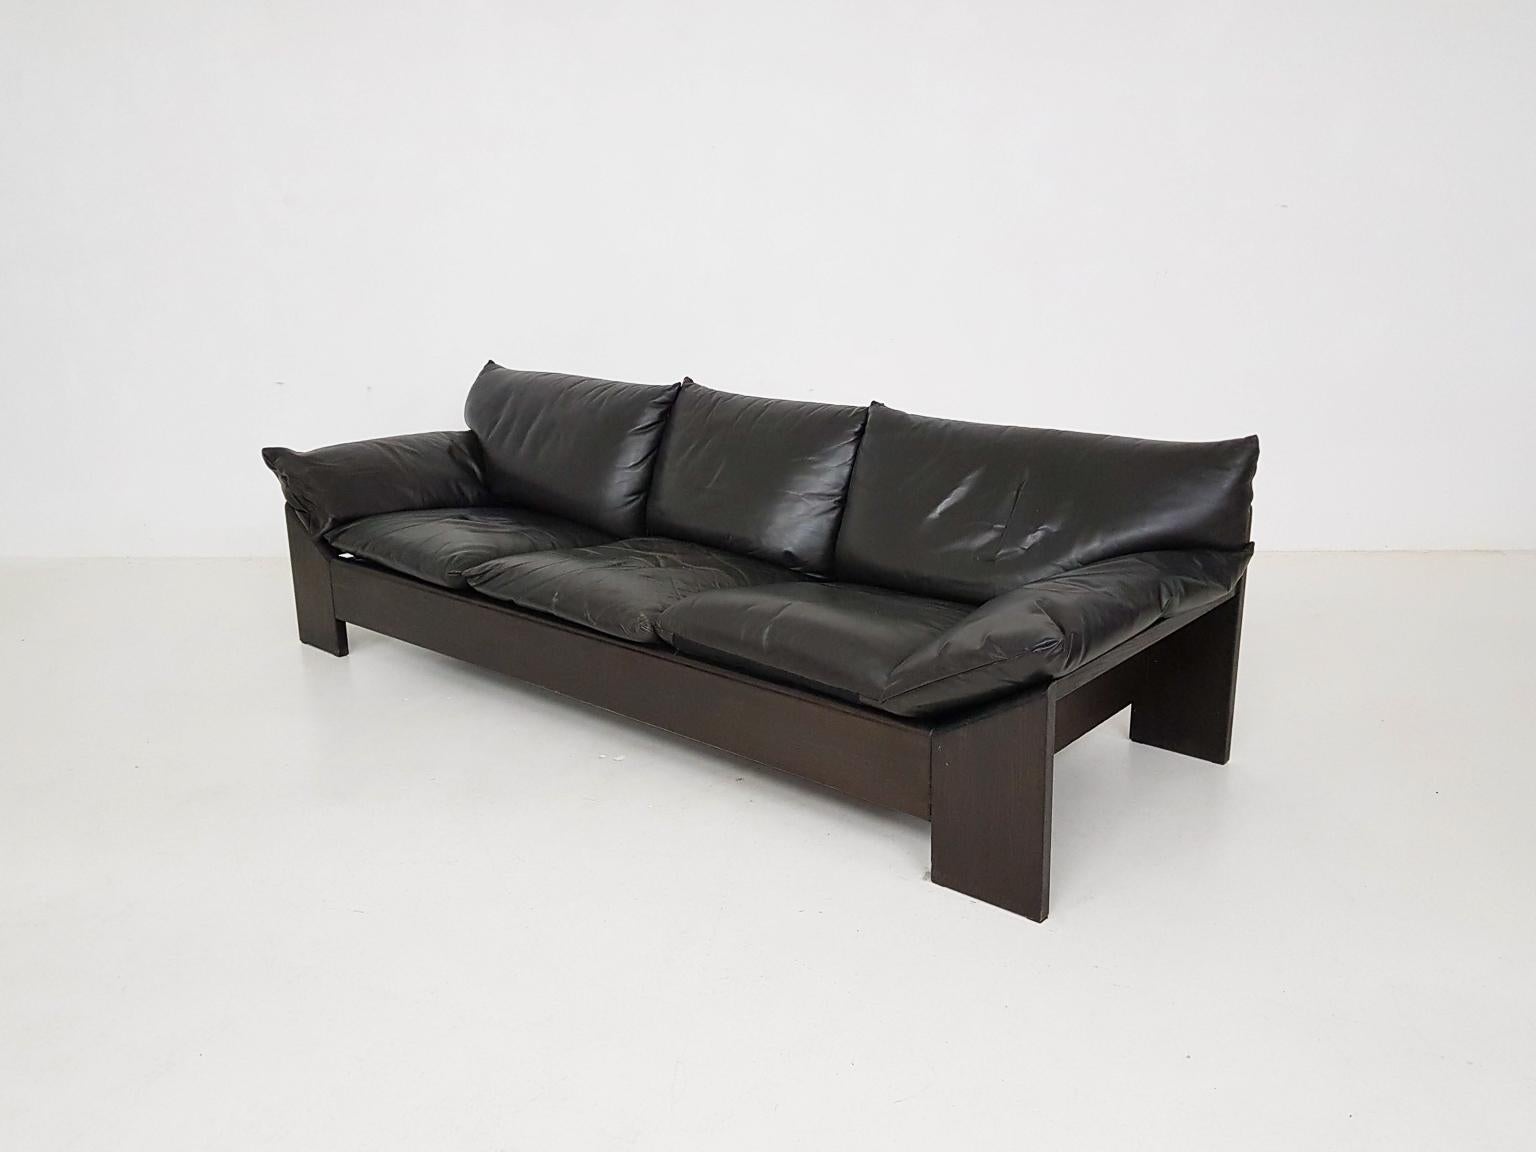 Brutalist high quality sofa by Dutch furniture manufacturer Leolux. Made of heavy wood and sturdy leather. Reminds us of sofa's by De Sede and the bz74 sofa and sz73 armchair by Martin Visser. Would match perfectly with natural stone coffee tables